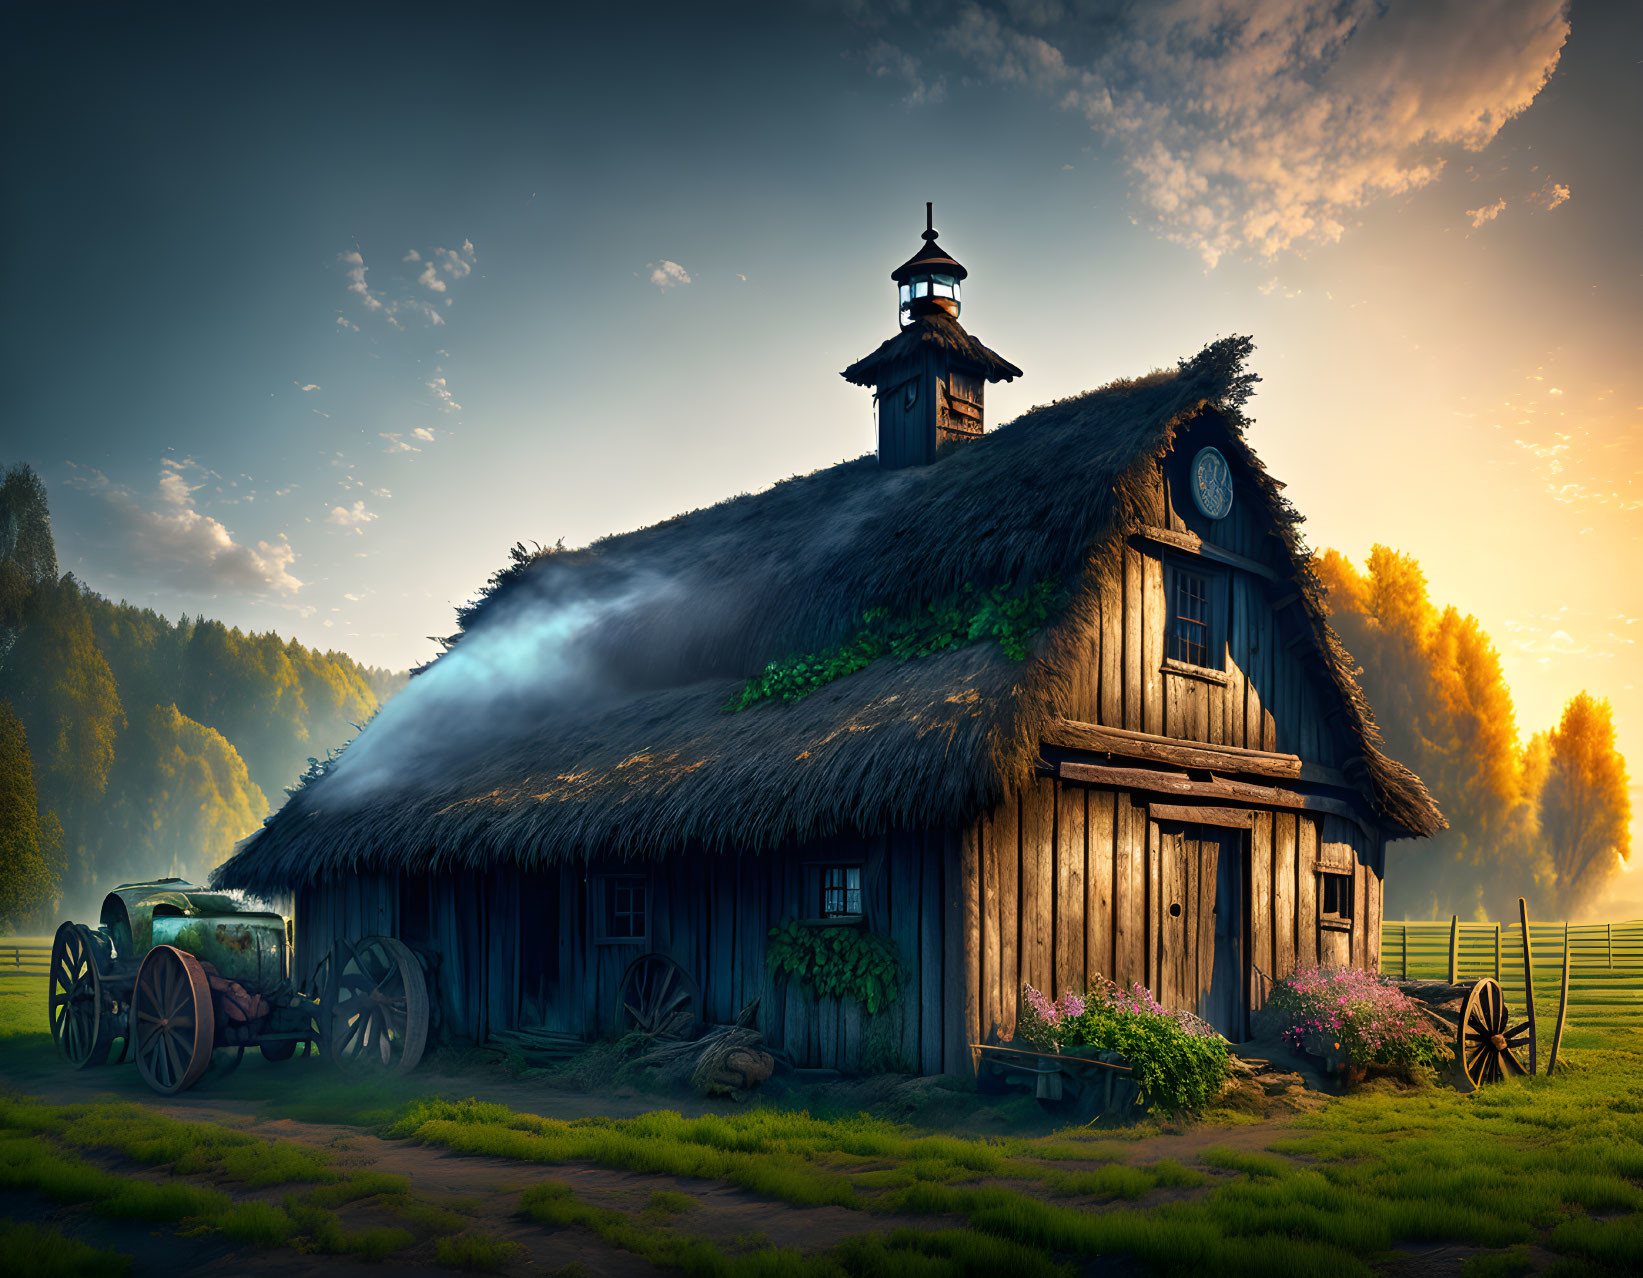 Thatched Cottage with Lighthouse Design, Chimney Smoke, Tractor, Greenery at Sunrise/S